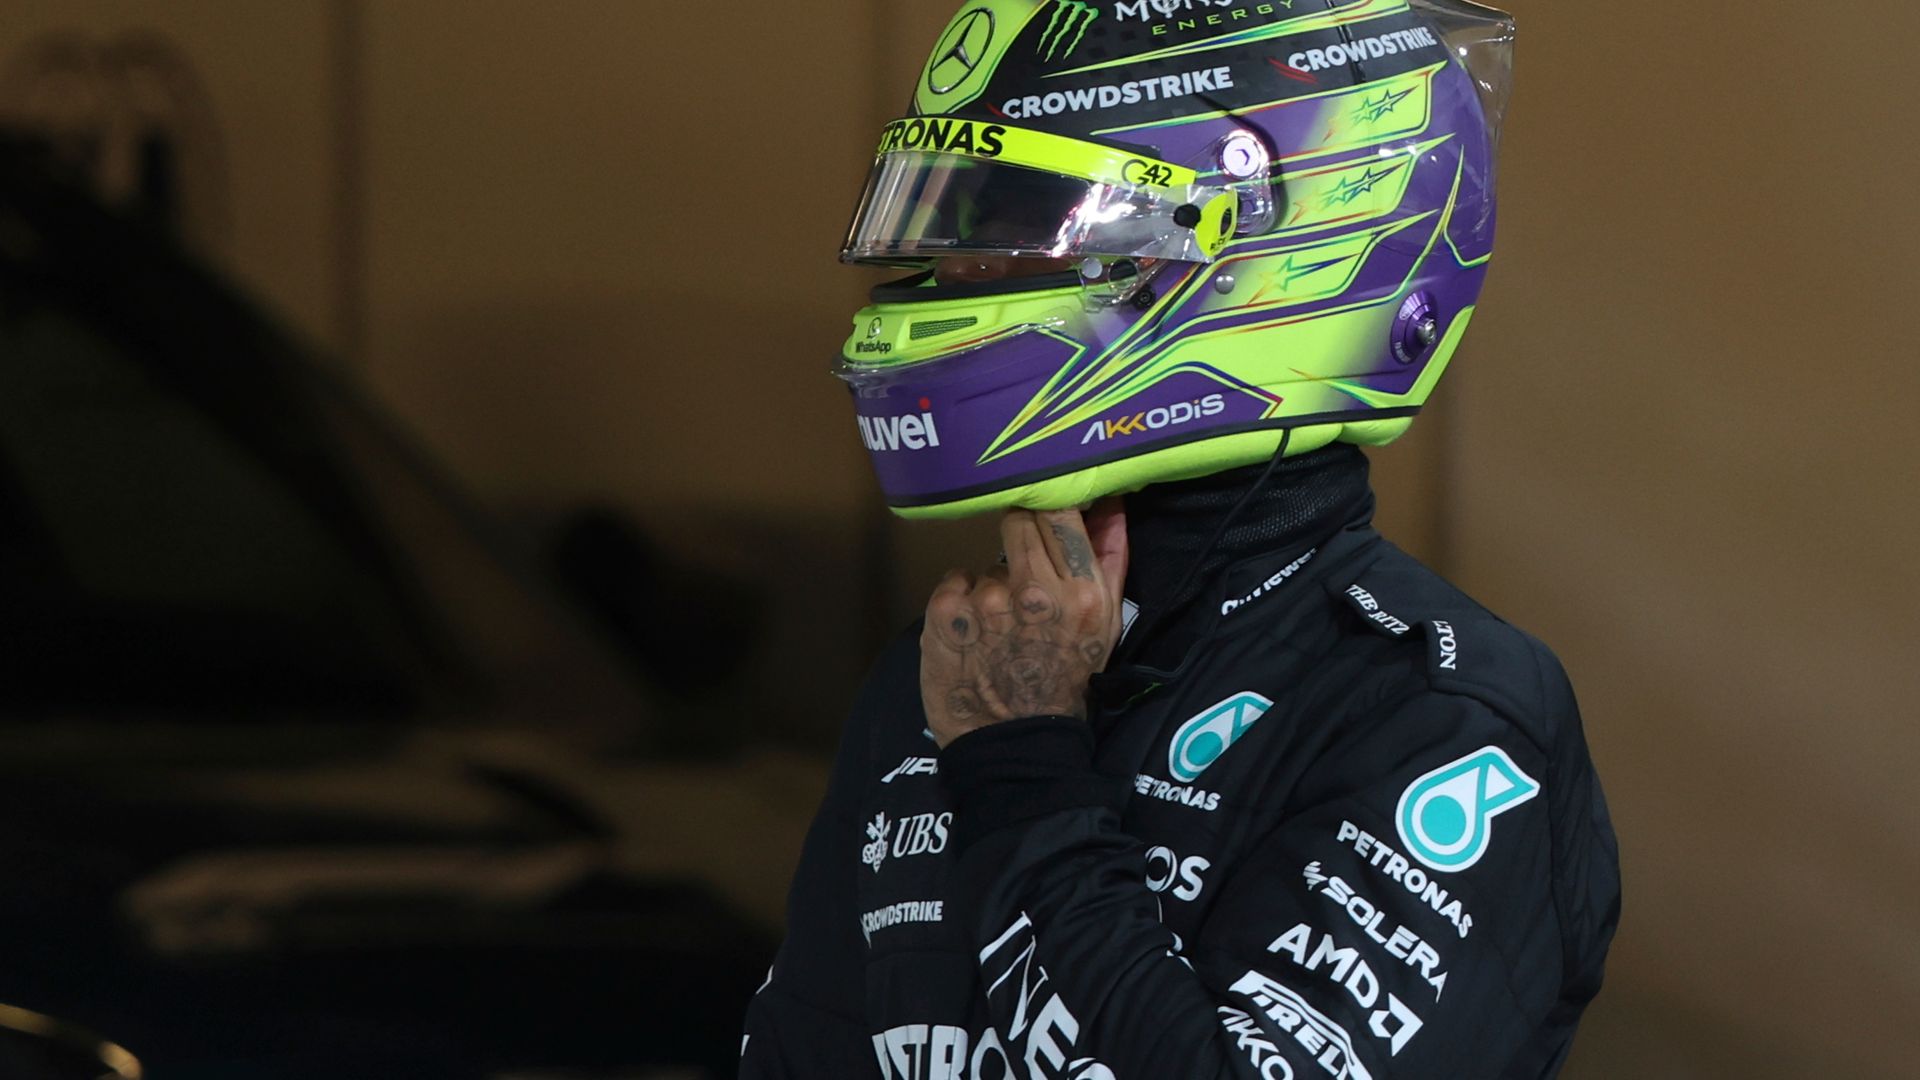 Hamilton doesn't 'have any answers' after fresh qualifying setback